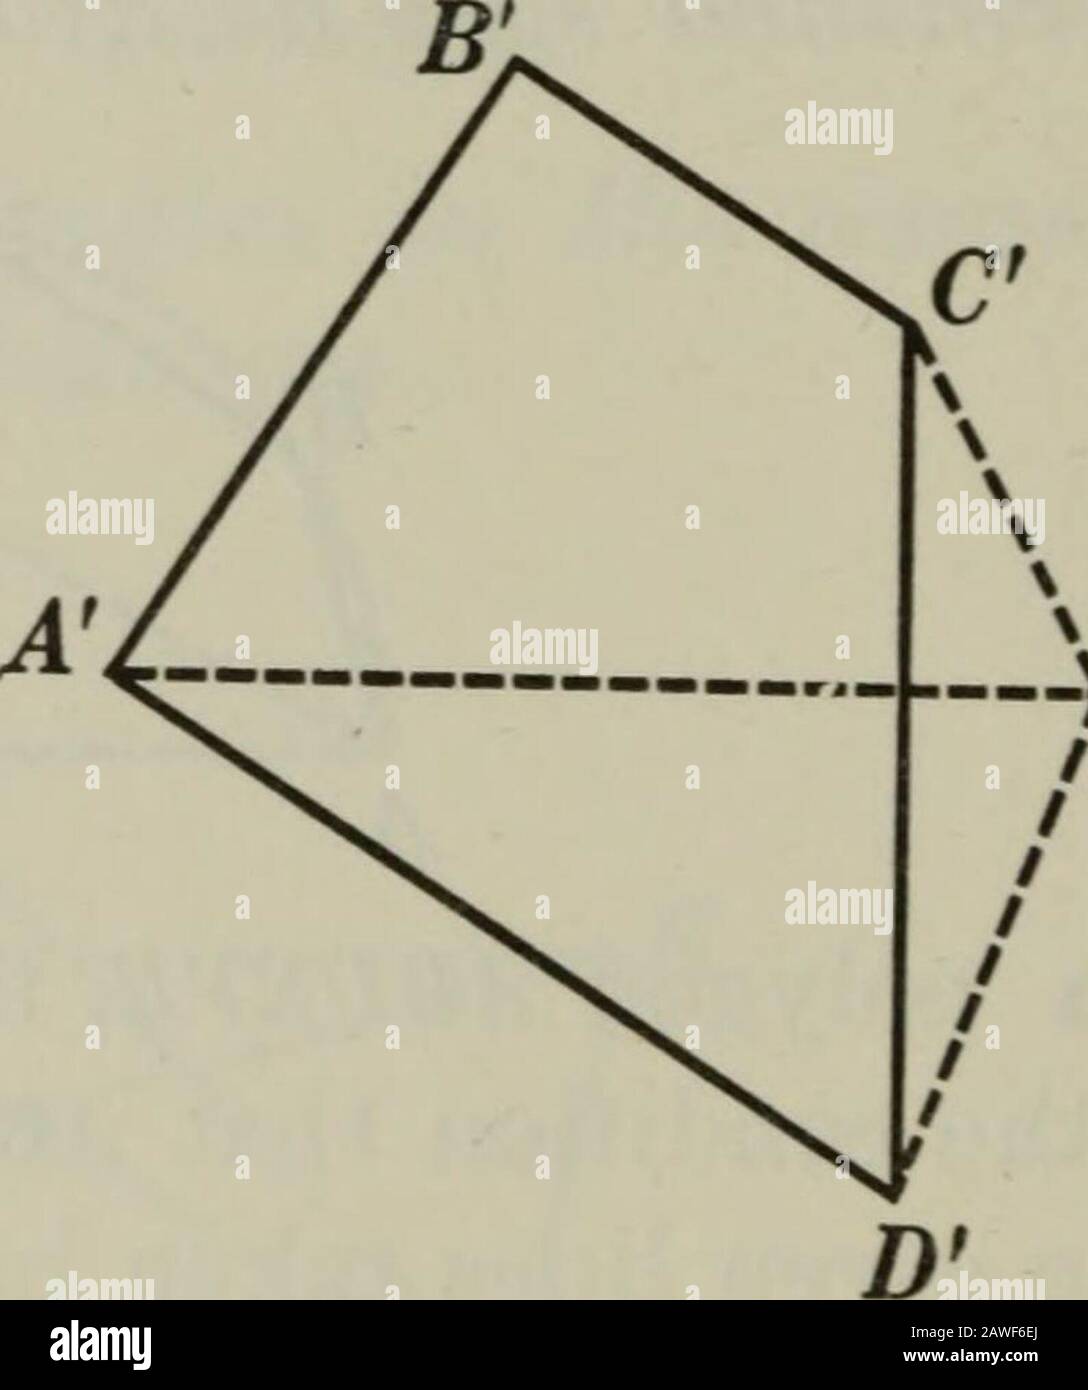 Plane And Solid Geometry L E Given Polygon Abcd Whicli Is Circumscribed By A O Andpolygon Ab D Which Cannot Be Circumscribed By A O Withab Ab Bc B C Cd I And Da